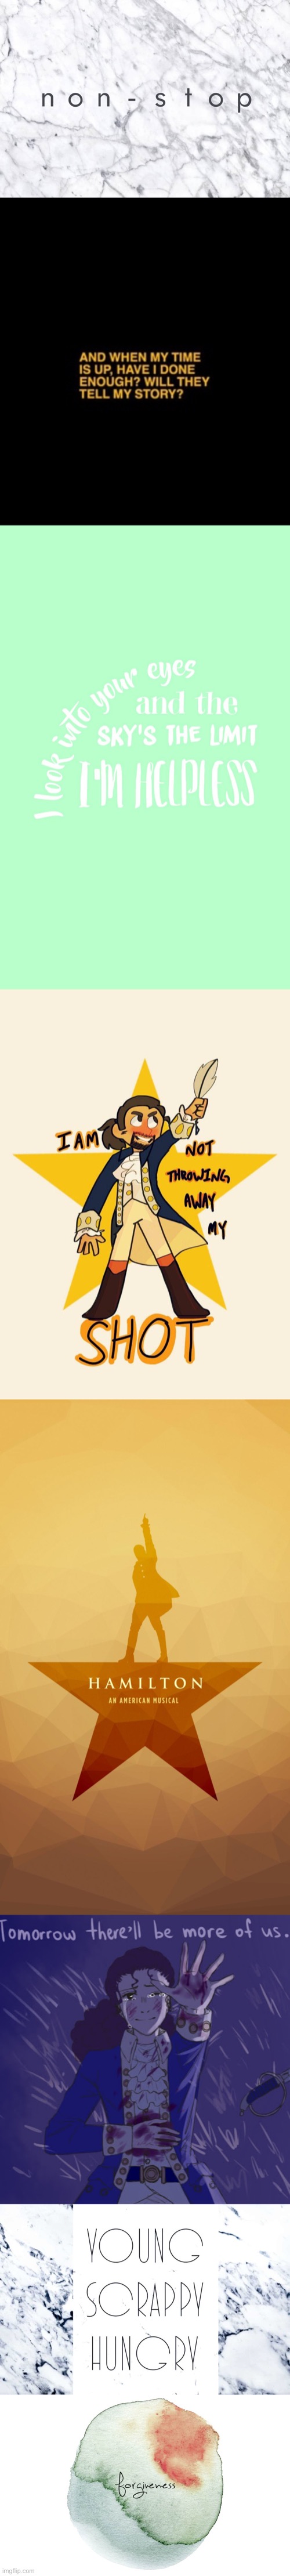 Just some fan art and wallpaper ?✨ | image tagged in alexander hamilton,hamilton,so i guess you can say things are getting pretty serious,socially awesome awkward penguin | made w/ Imgflip meme maker